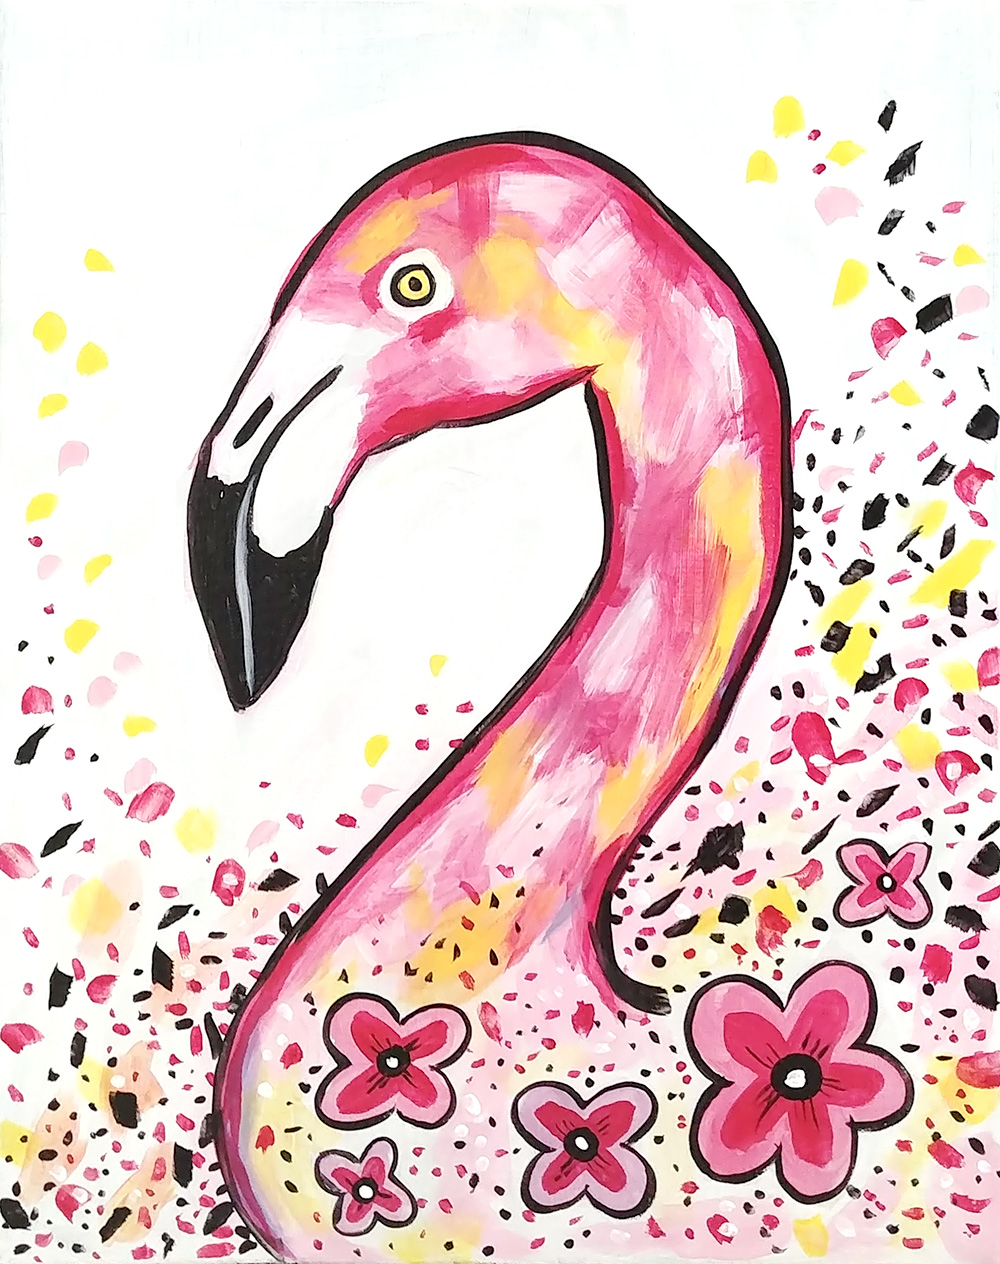 A Funfetti Flamingo experience project by Yaymaker